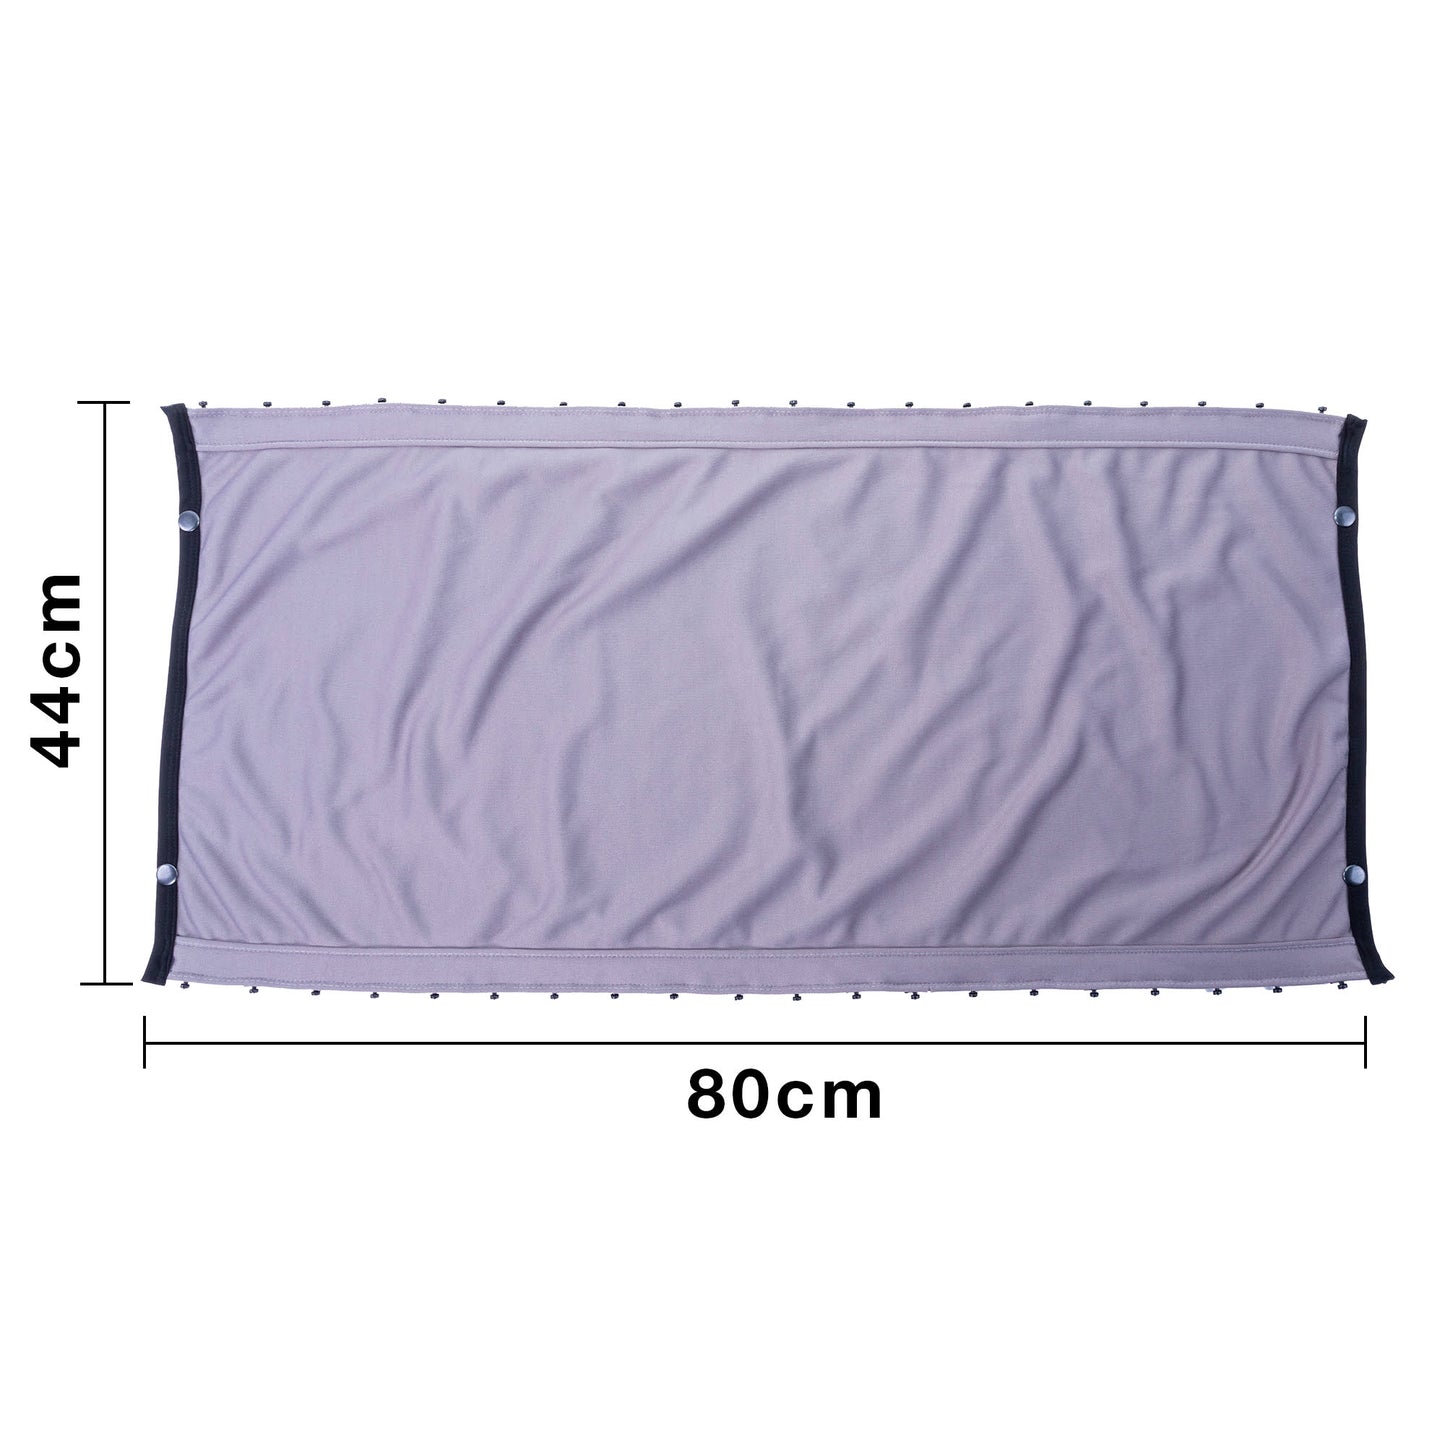 Premium Black-out Curtain Material 44cm For camper conversions Spares for Van-X Curtain kits